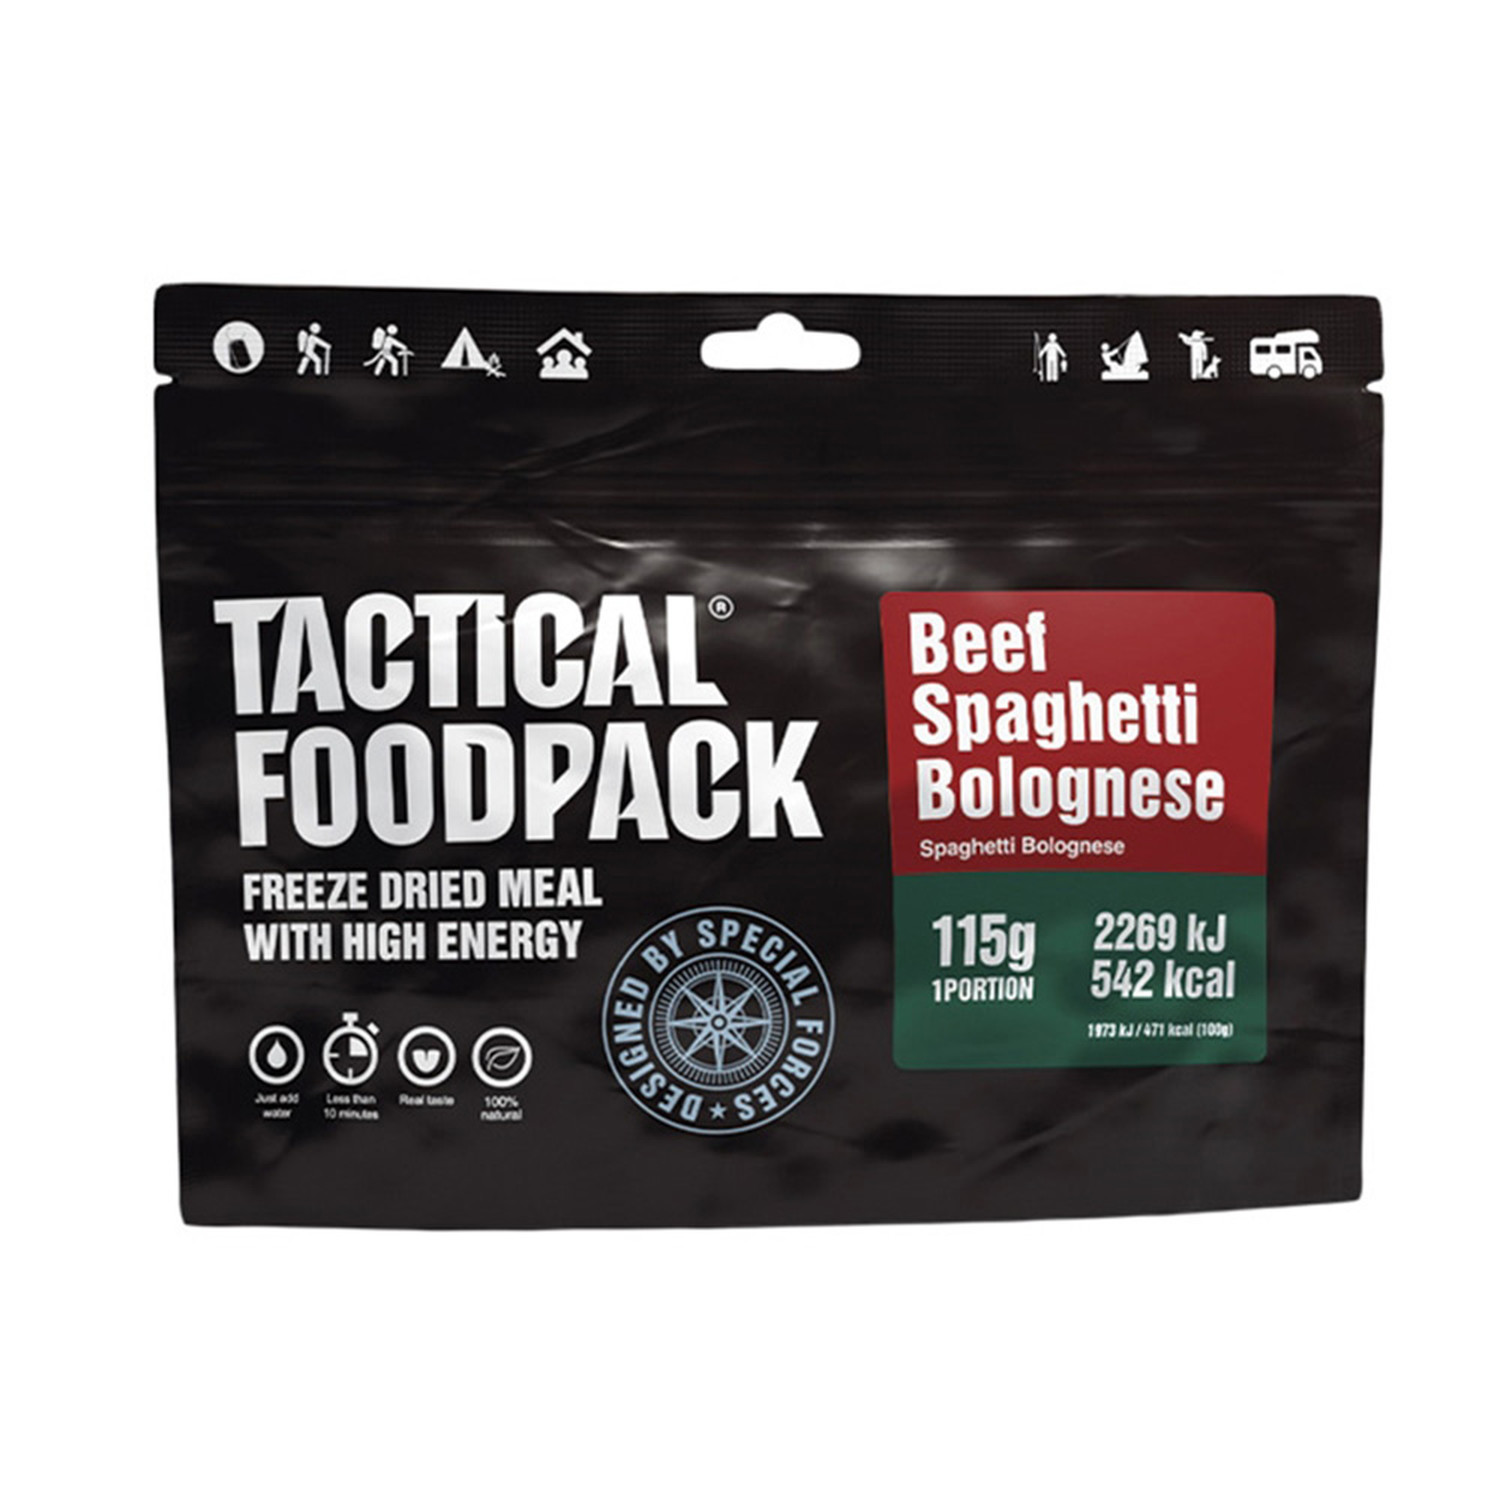 Tactical Foodpack® Beef Spaghetti Bolognese (Spaghetti Bolognese) gefriergetrocknete Outdoor-Mahlzeit